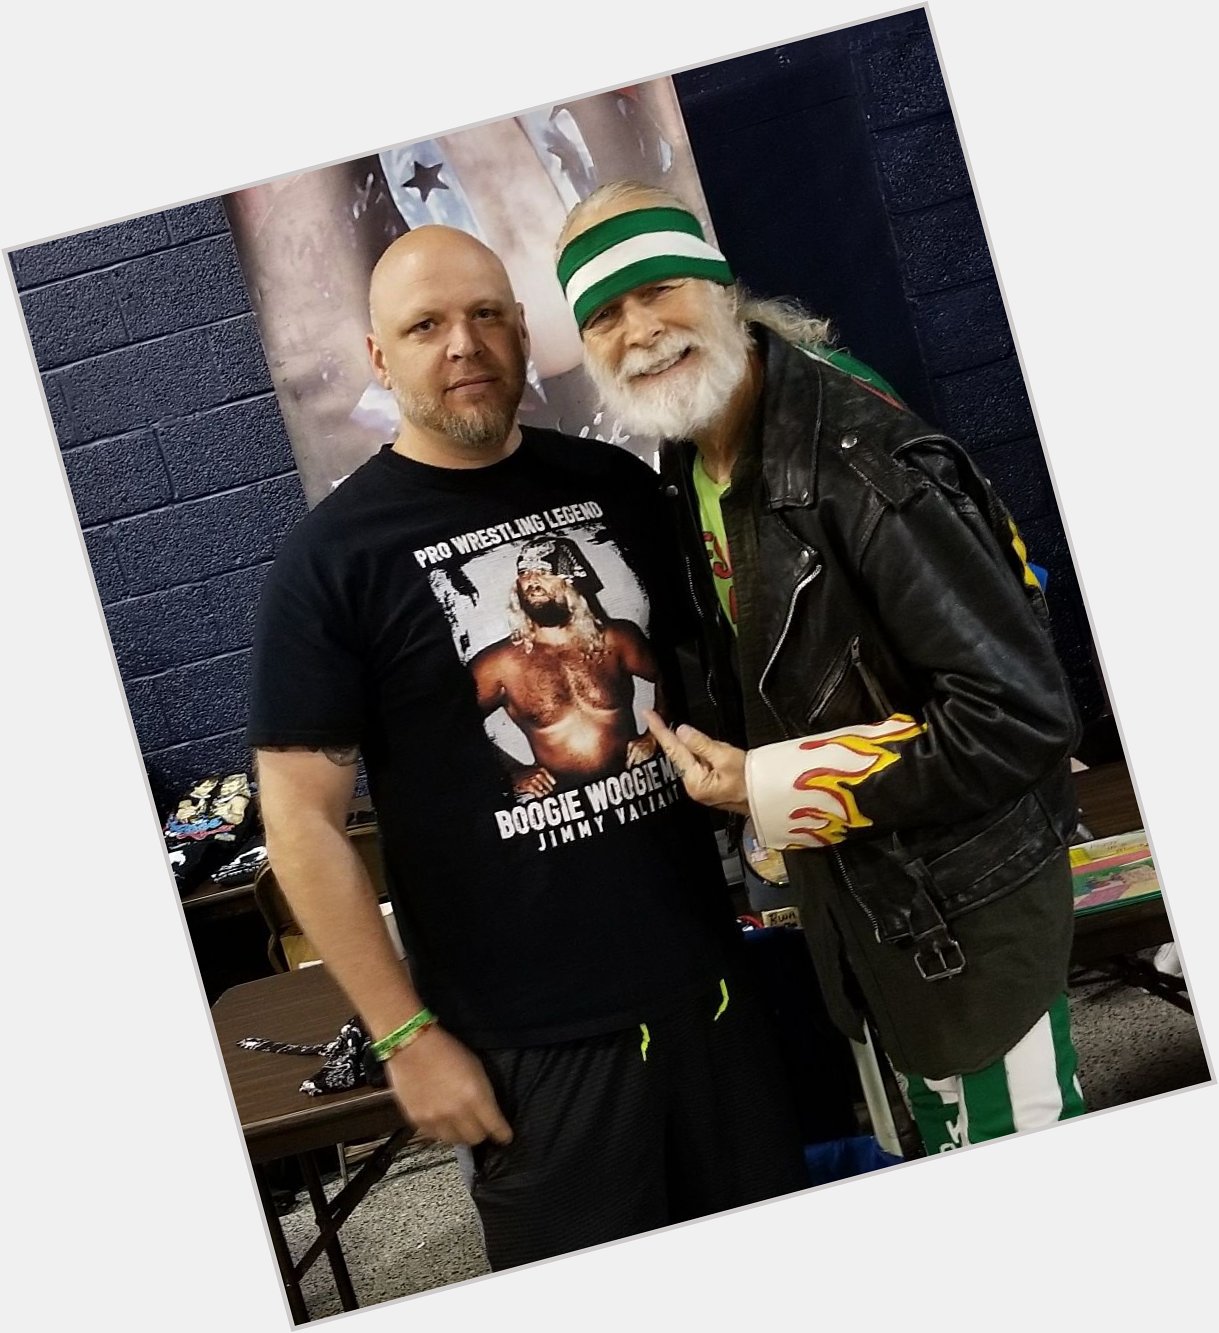 Happy Birthday to Jimmy Valiant! The reason this 40 year old still watches wrestling to this day. 